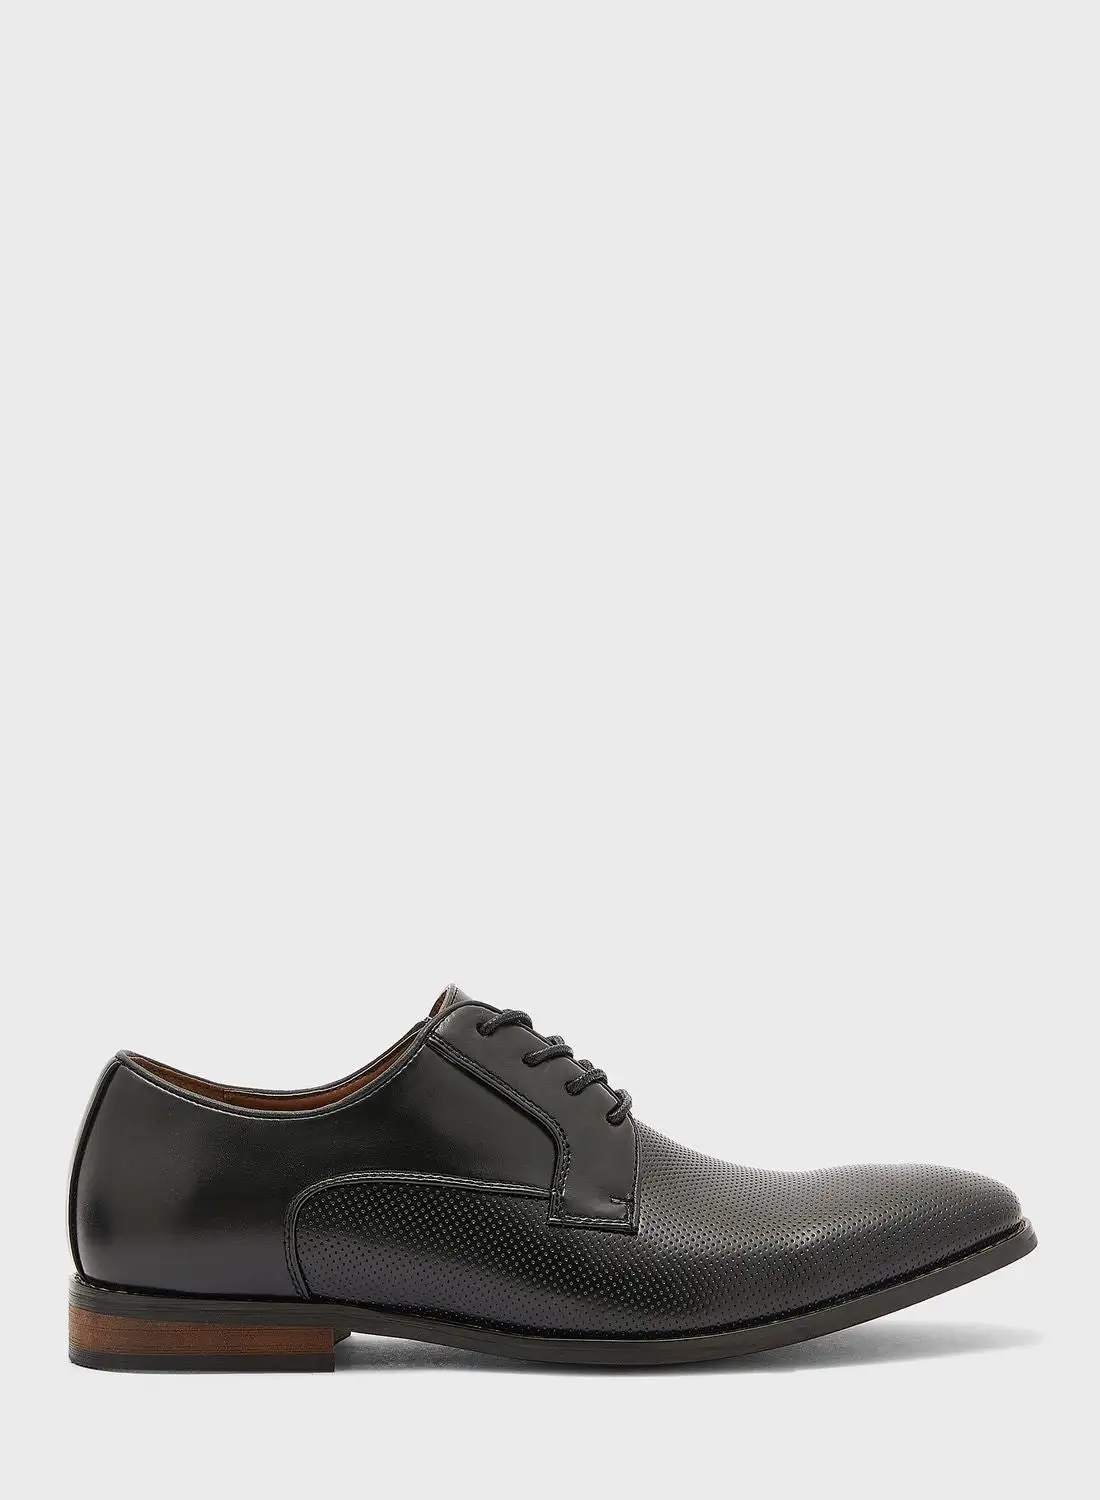 Robert Wood Classic Burnished Formal Lace Up